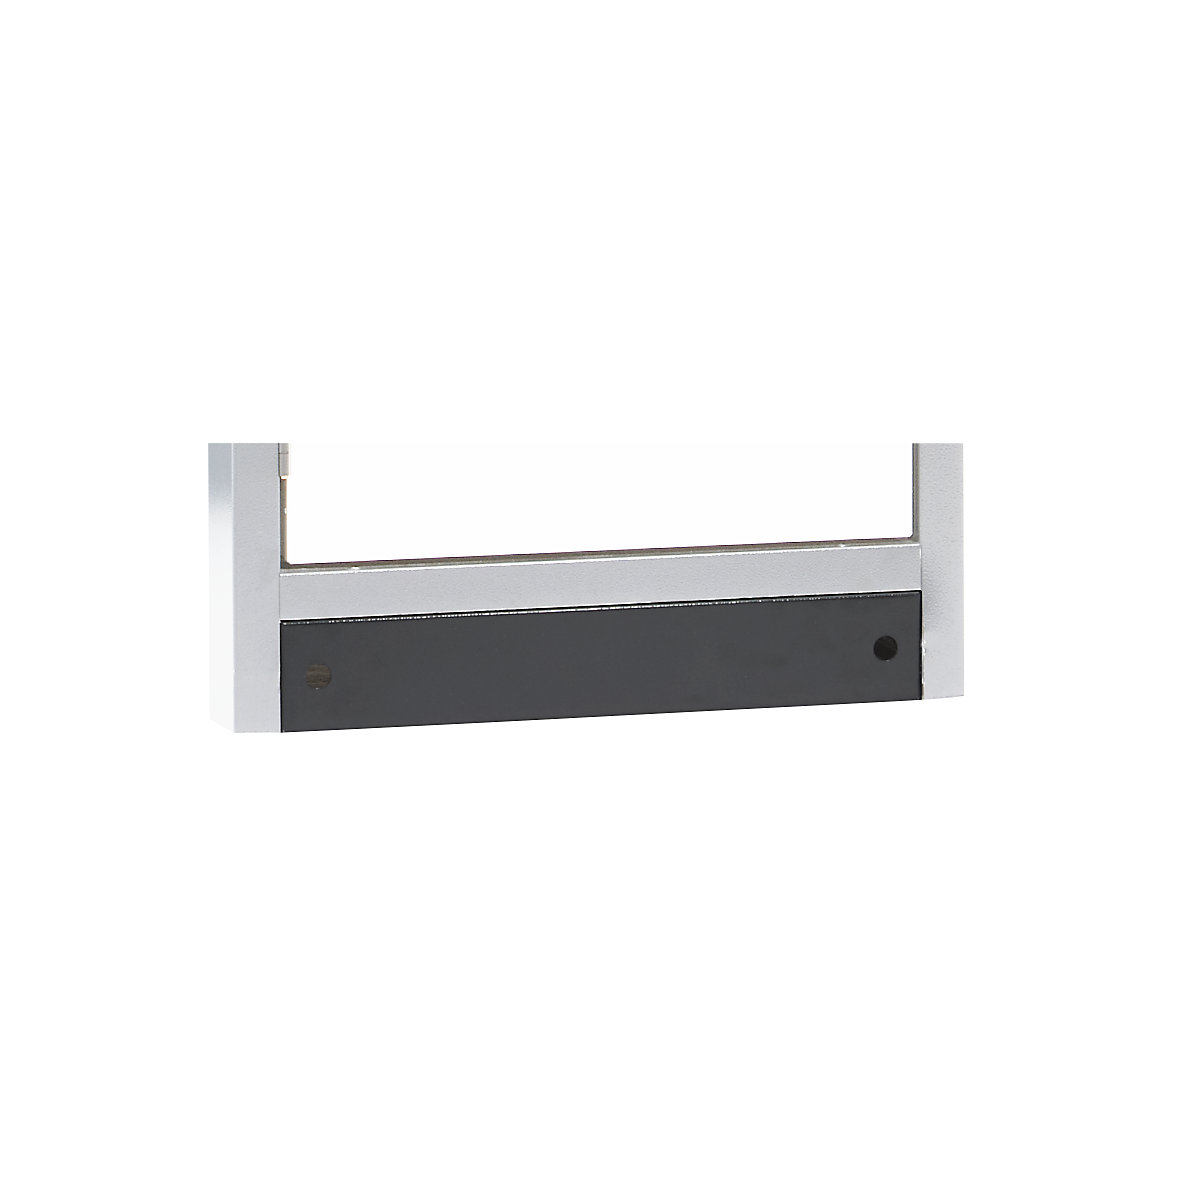 Plinth cover plate - asecos